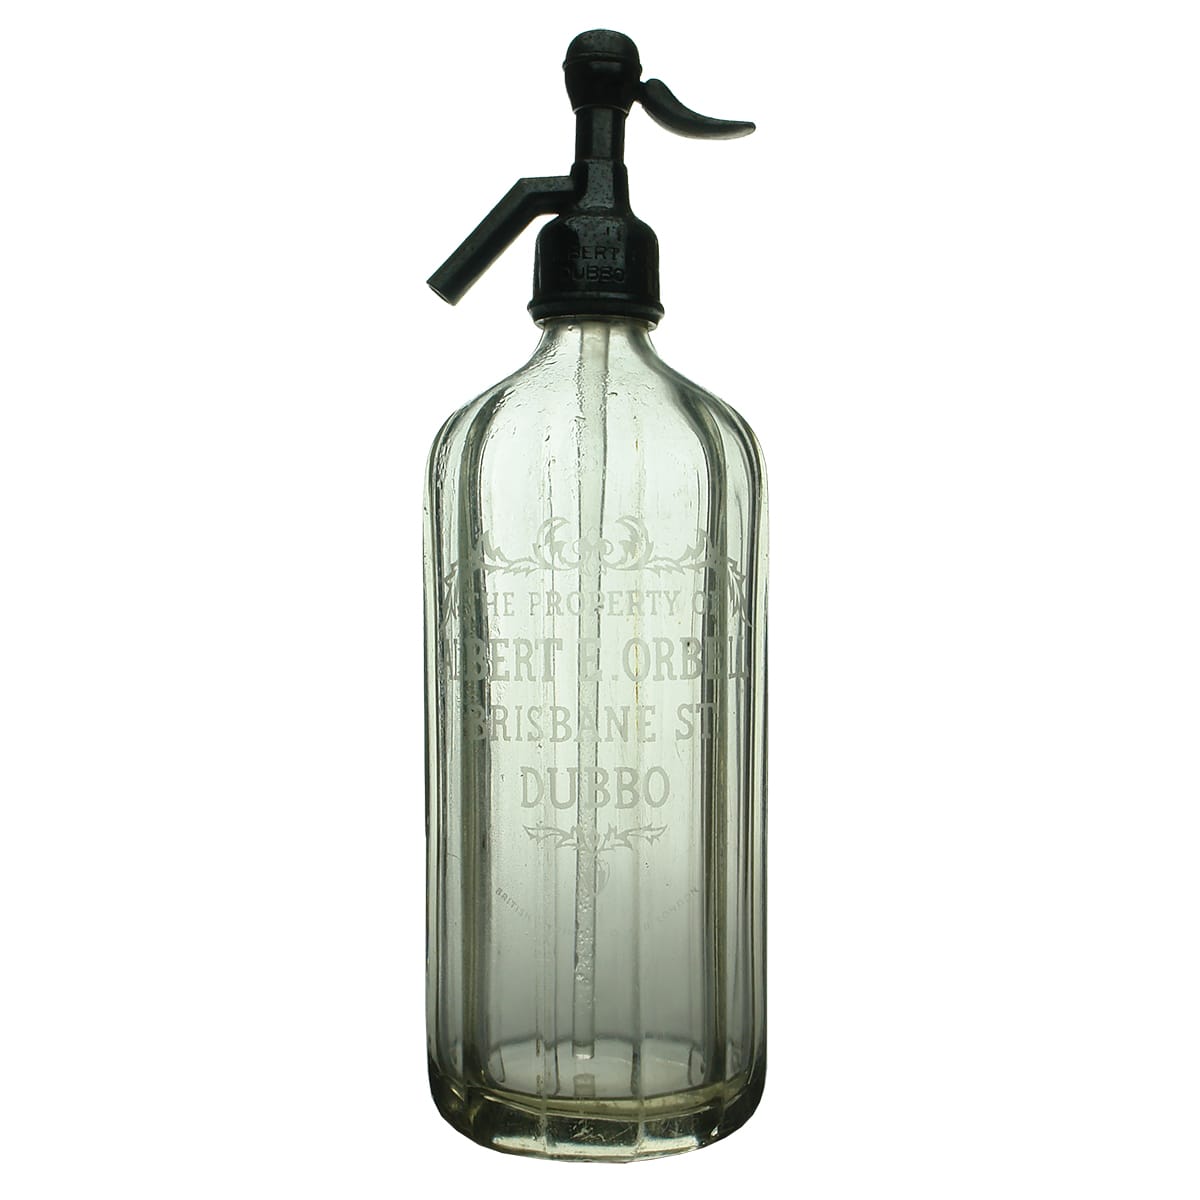 Soda Syphon.  Albert E. Orbell, Dubbo.  Fluted.  30 oz. (New South Wales)